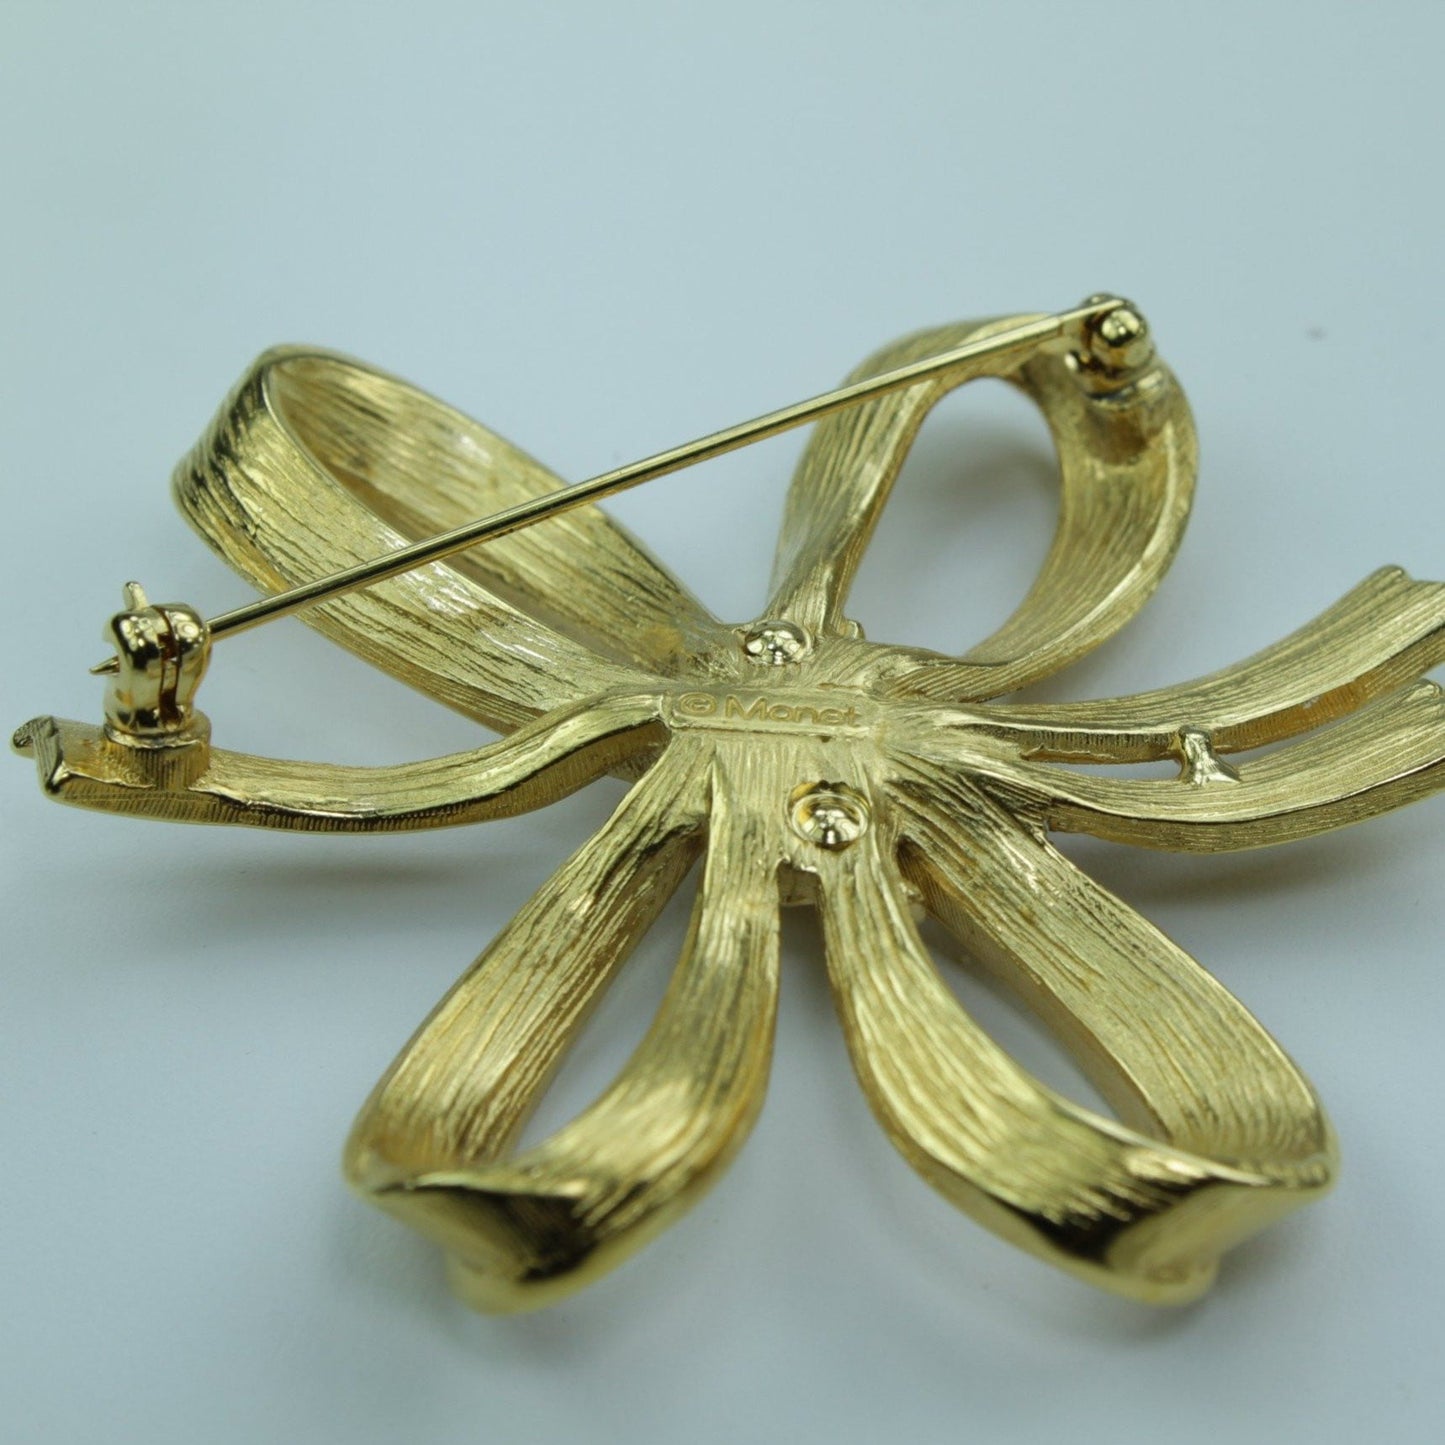 Vintage MONET Pin Gold Free Form Stylized Bow Mid Century excellent quality